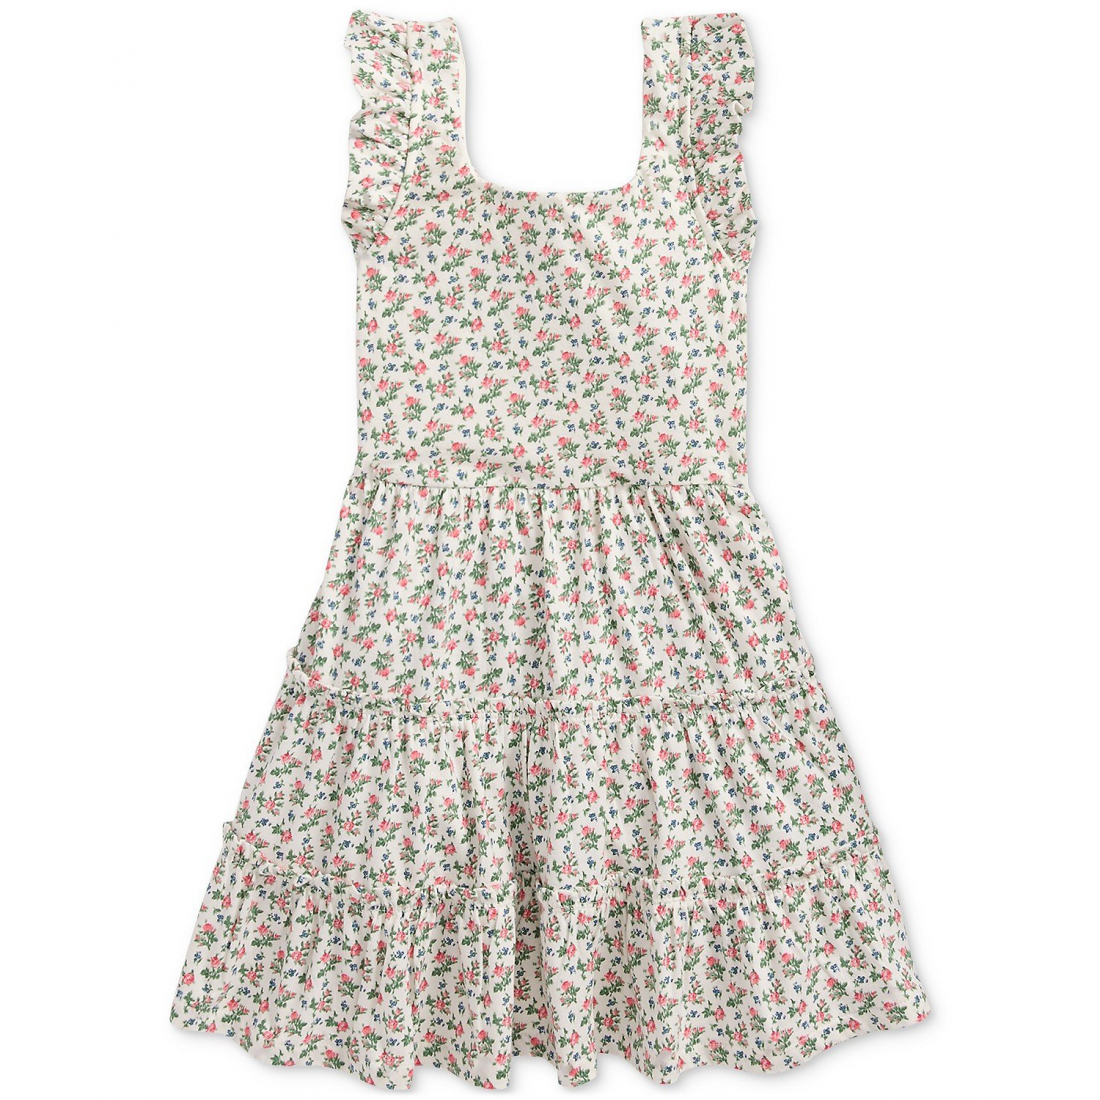 Robe 'Floral Ruffled Cotton Jersey' pour Bambins & petites filles